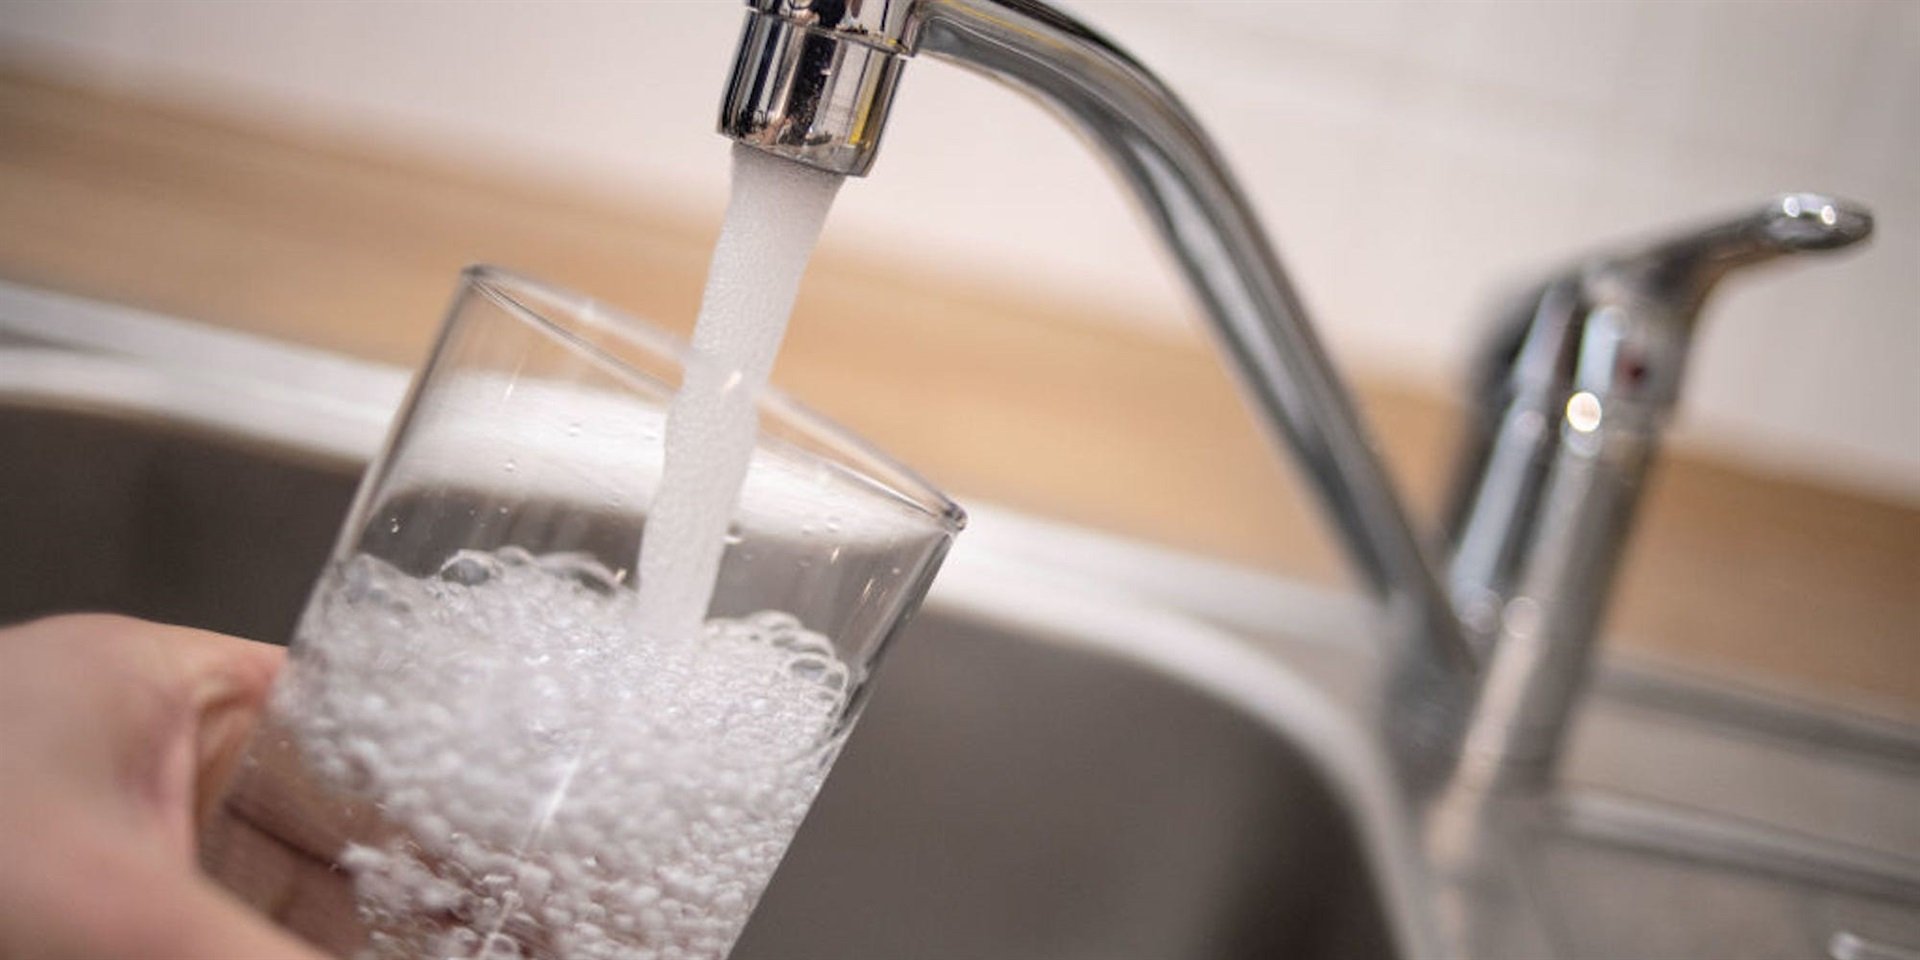 Water safe to drink: City of Cape Town lifts precautionary boil notice for residents - News24